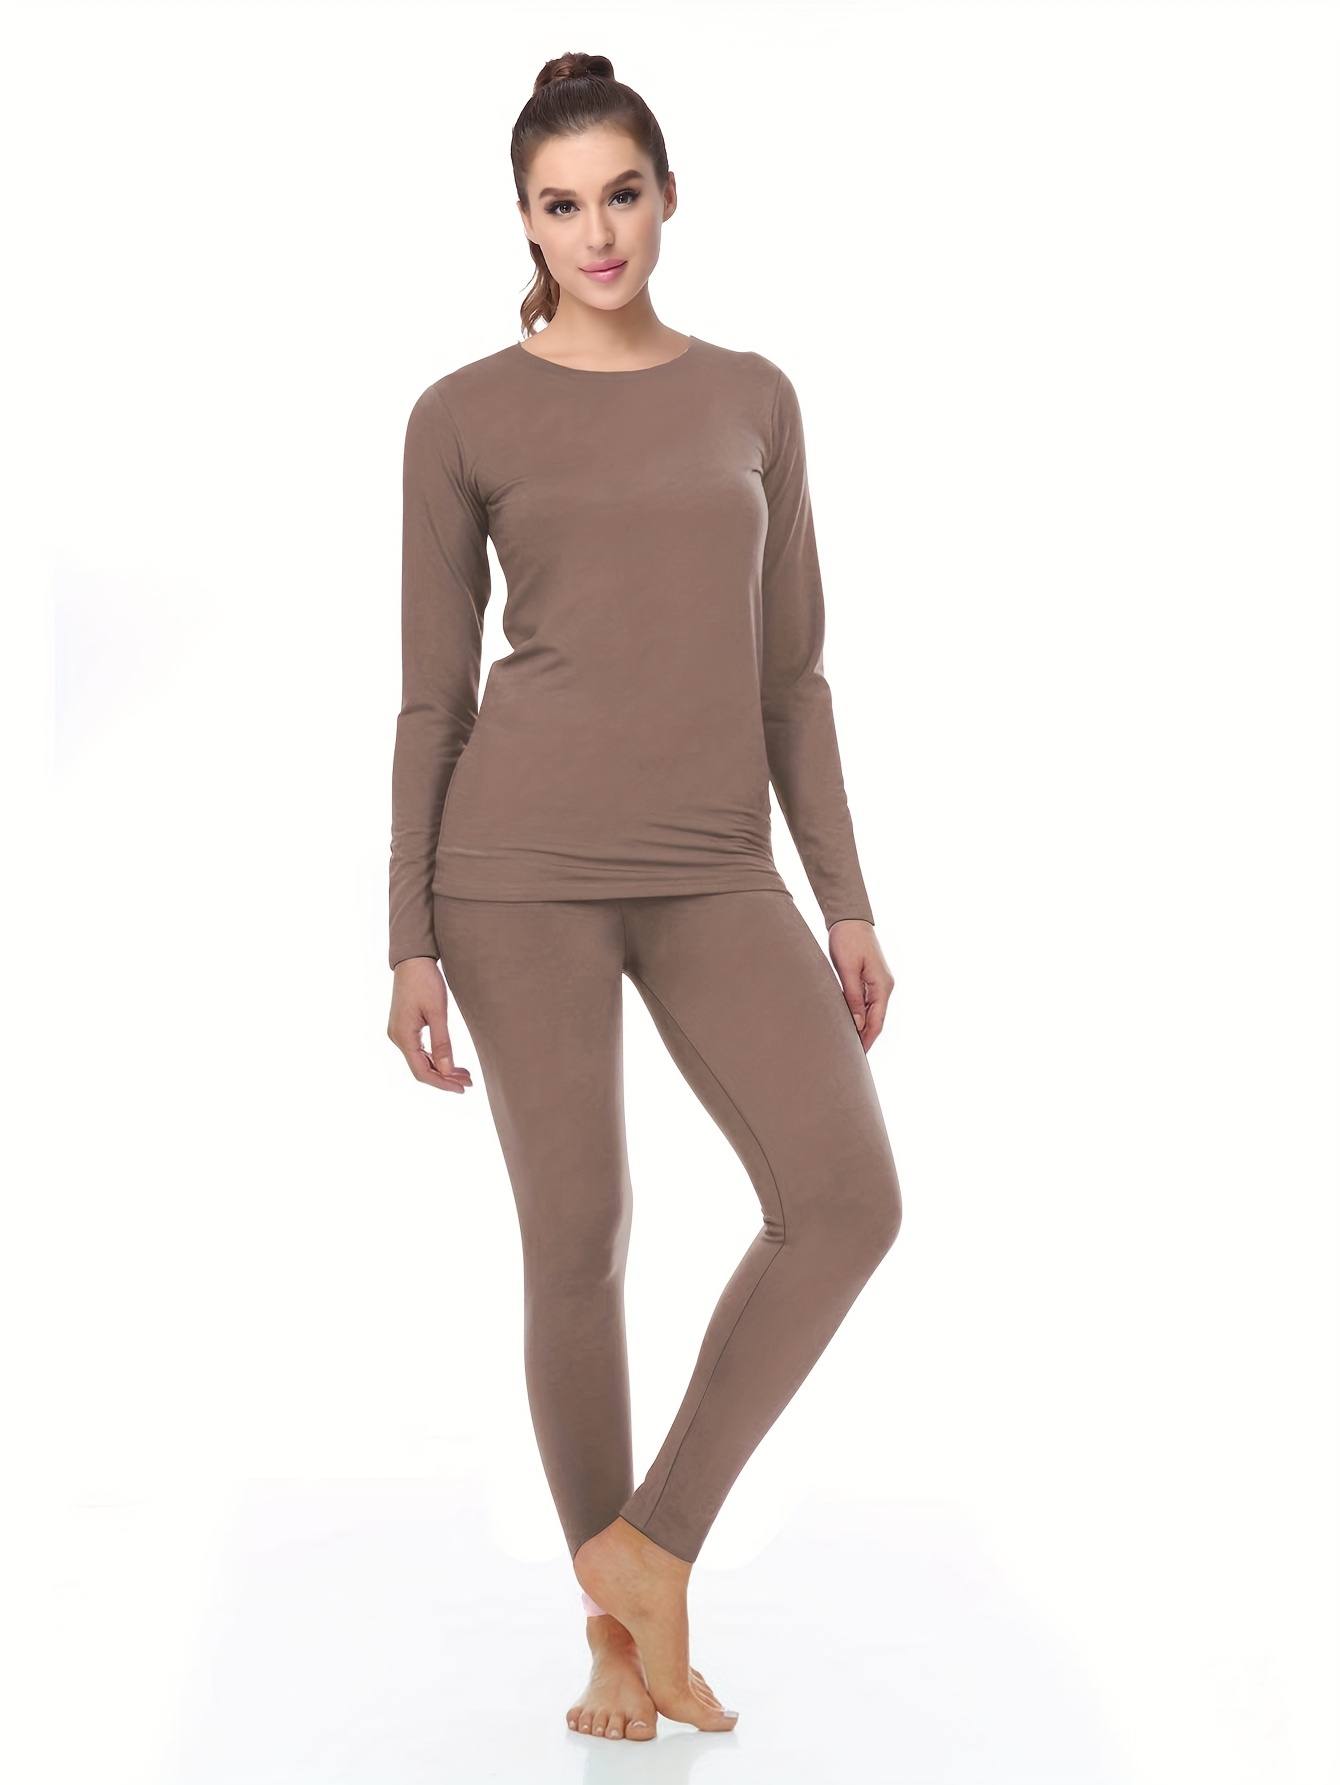 Thermal Underwear Set for Women Fleece Lined Base Layer Tops